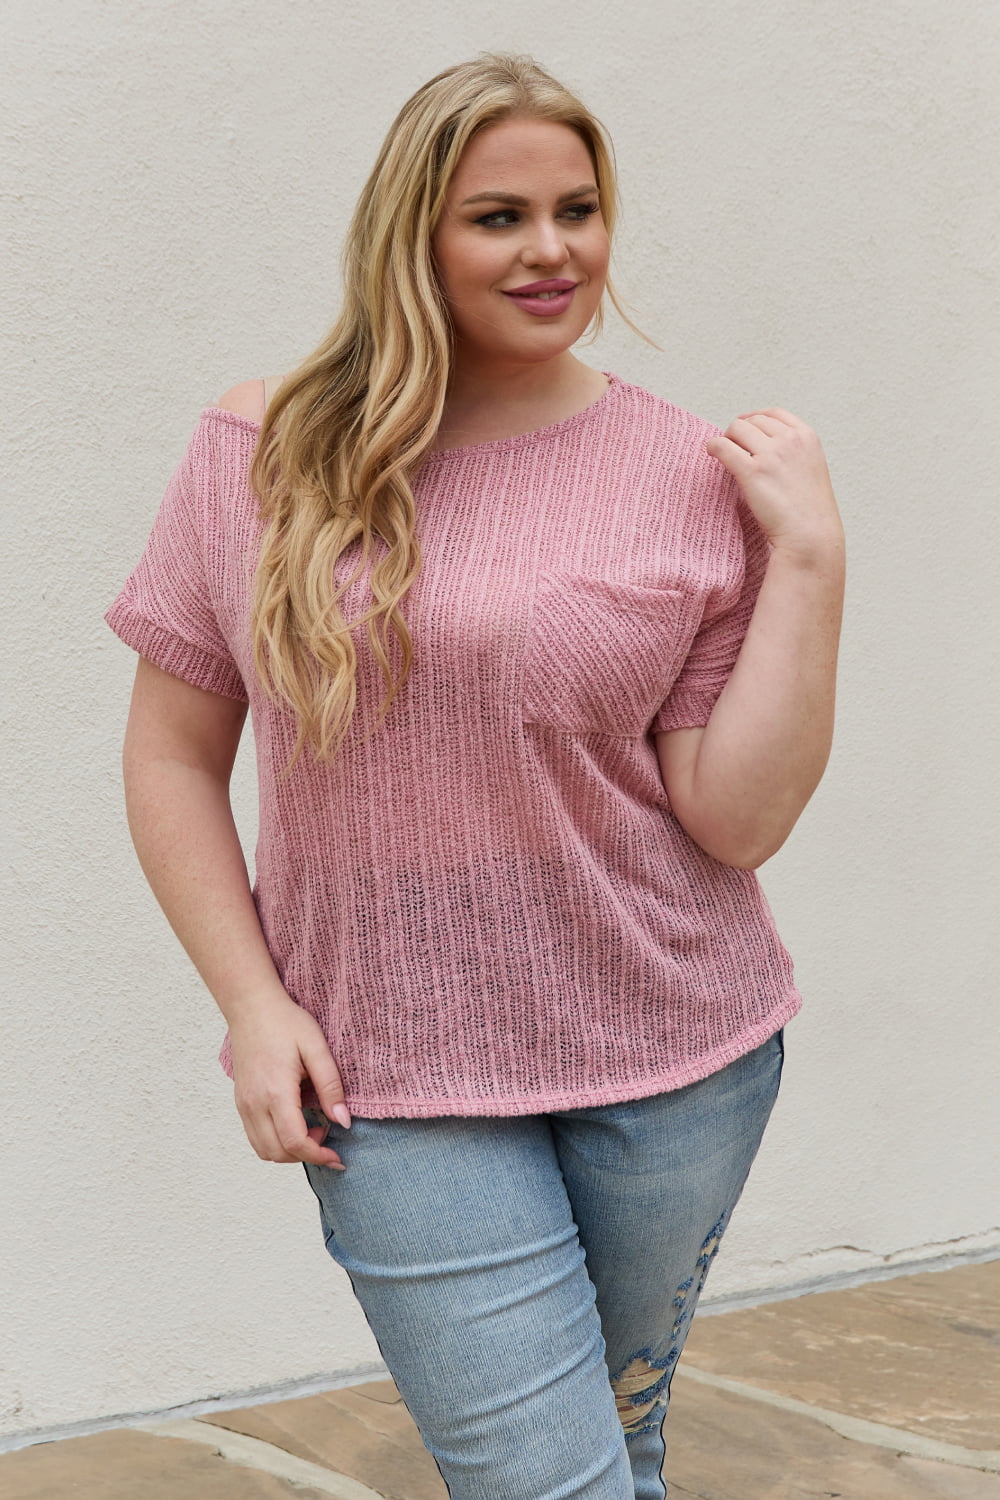 Chunky Knit Short Sleeve Top in Mauve - Camis & Tops - Shirts & Tops - 8 - 2024